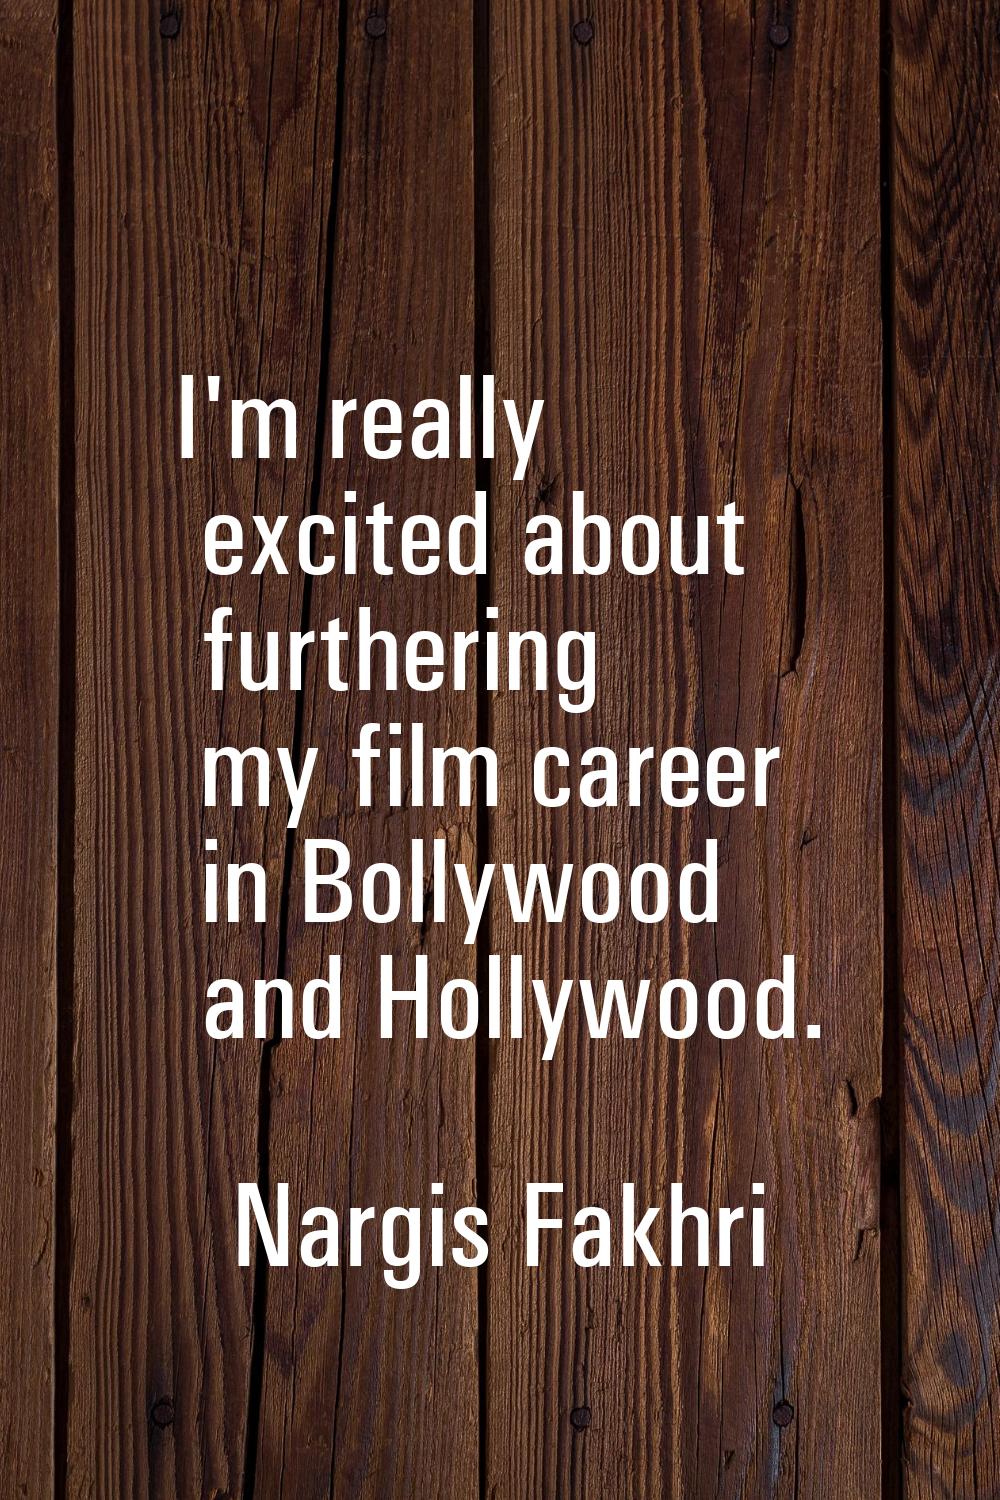 I'm really excited about furthering my film career in Bollywood and Hollywood.